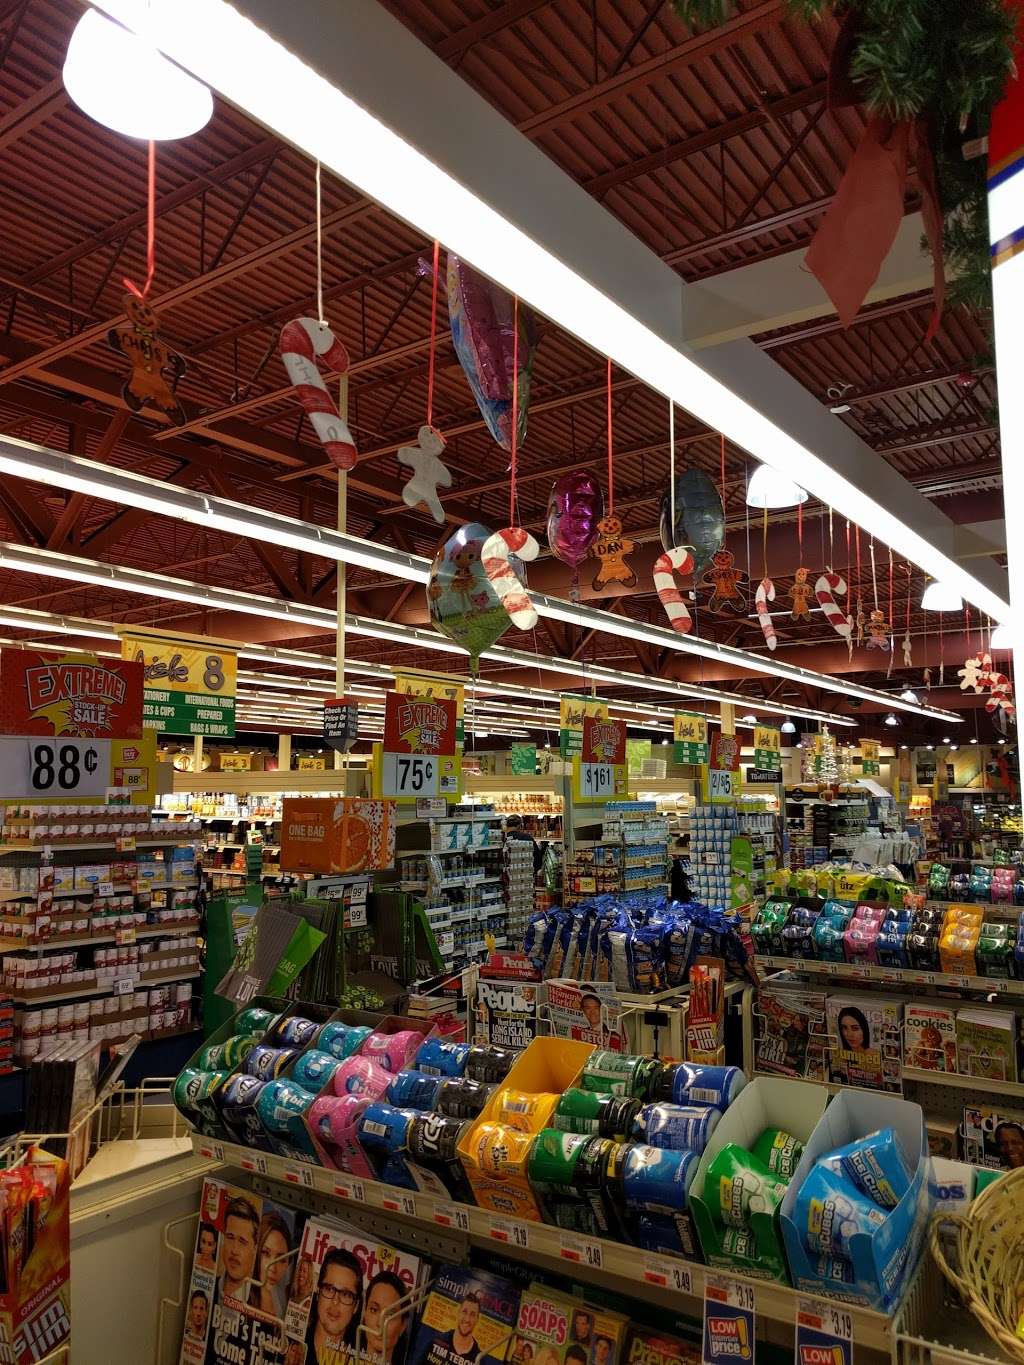 GIANT Food Stores | 314 Norristown Rd, Horsham, PA 19044 | Phone: (215) 682-7422